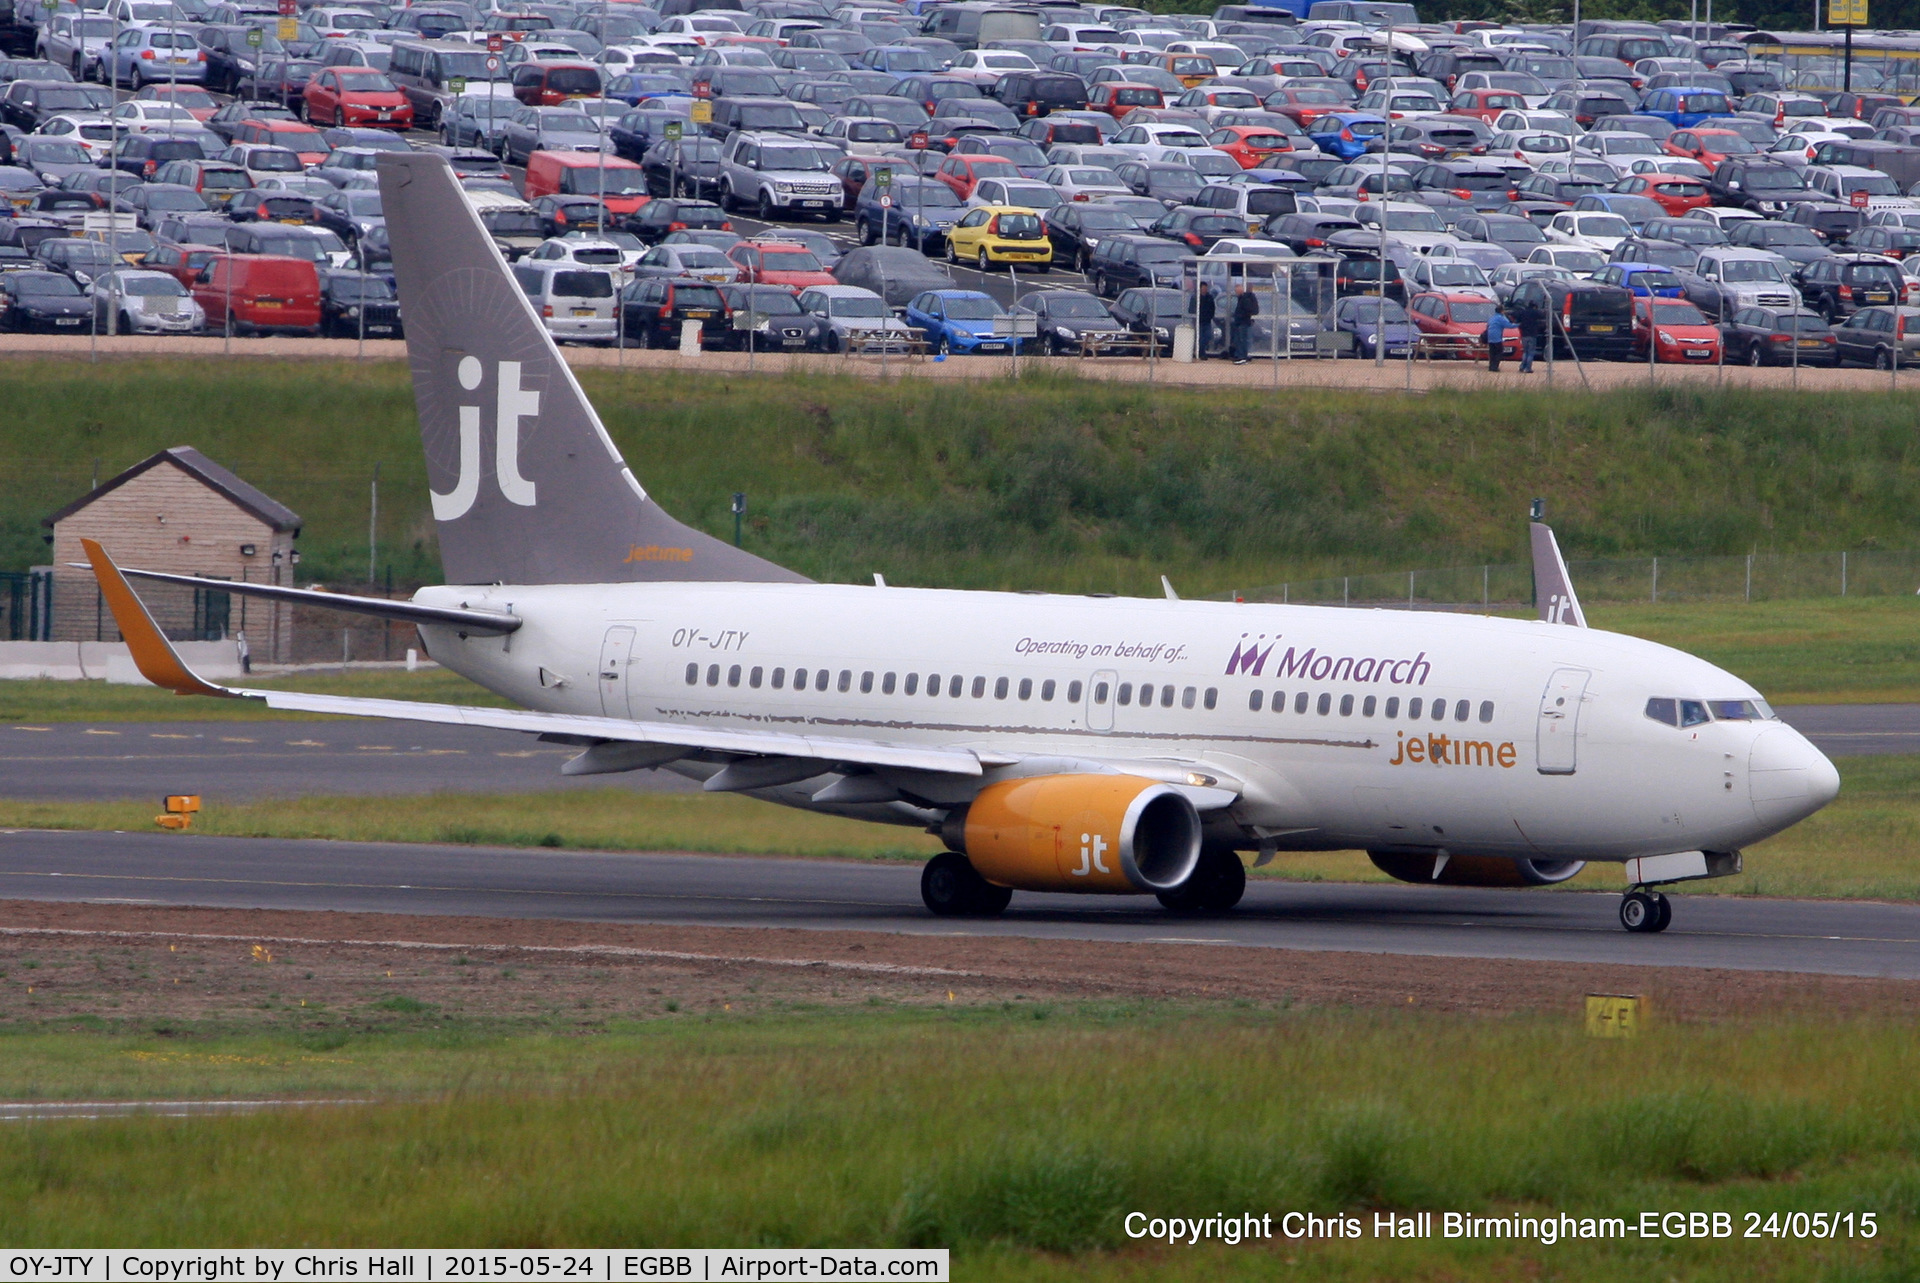 OY-JTY, 2001 Boeing 737-7Q8 C/N 30727, Jettime operating for Monarch